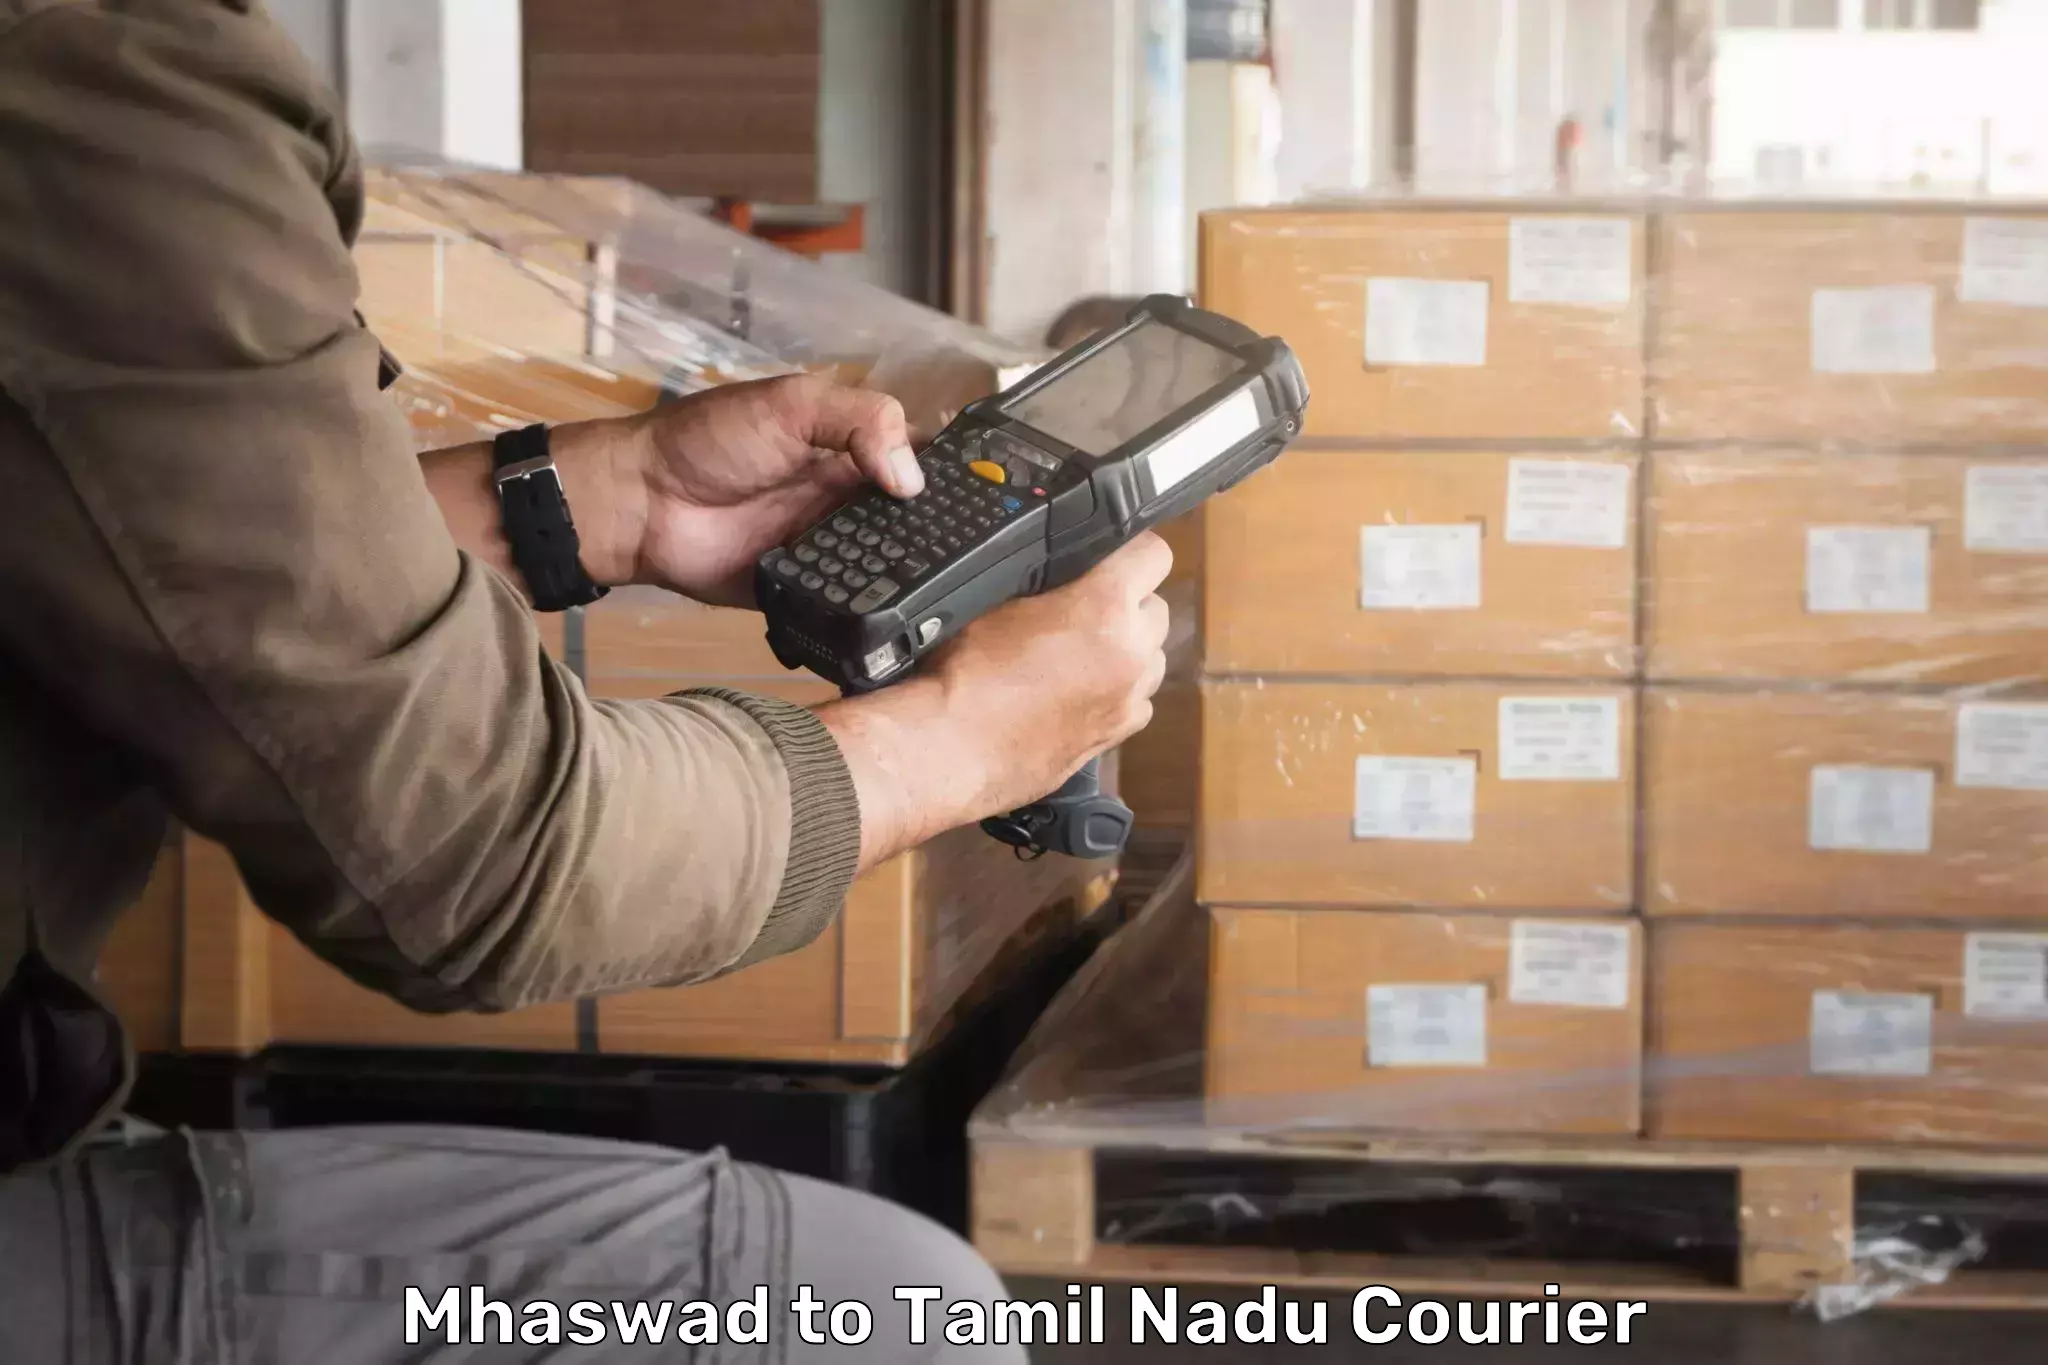 Advanced shipping services Mhaswad to Melur